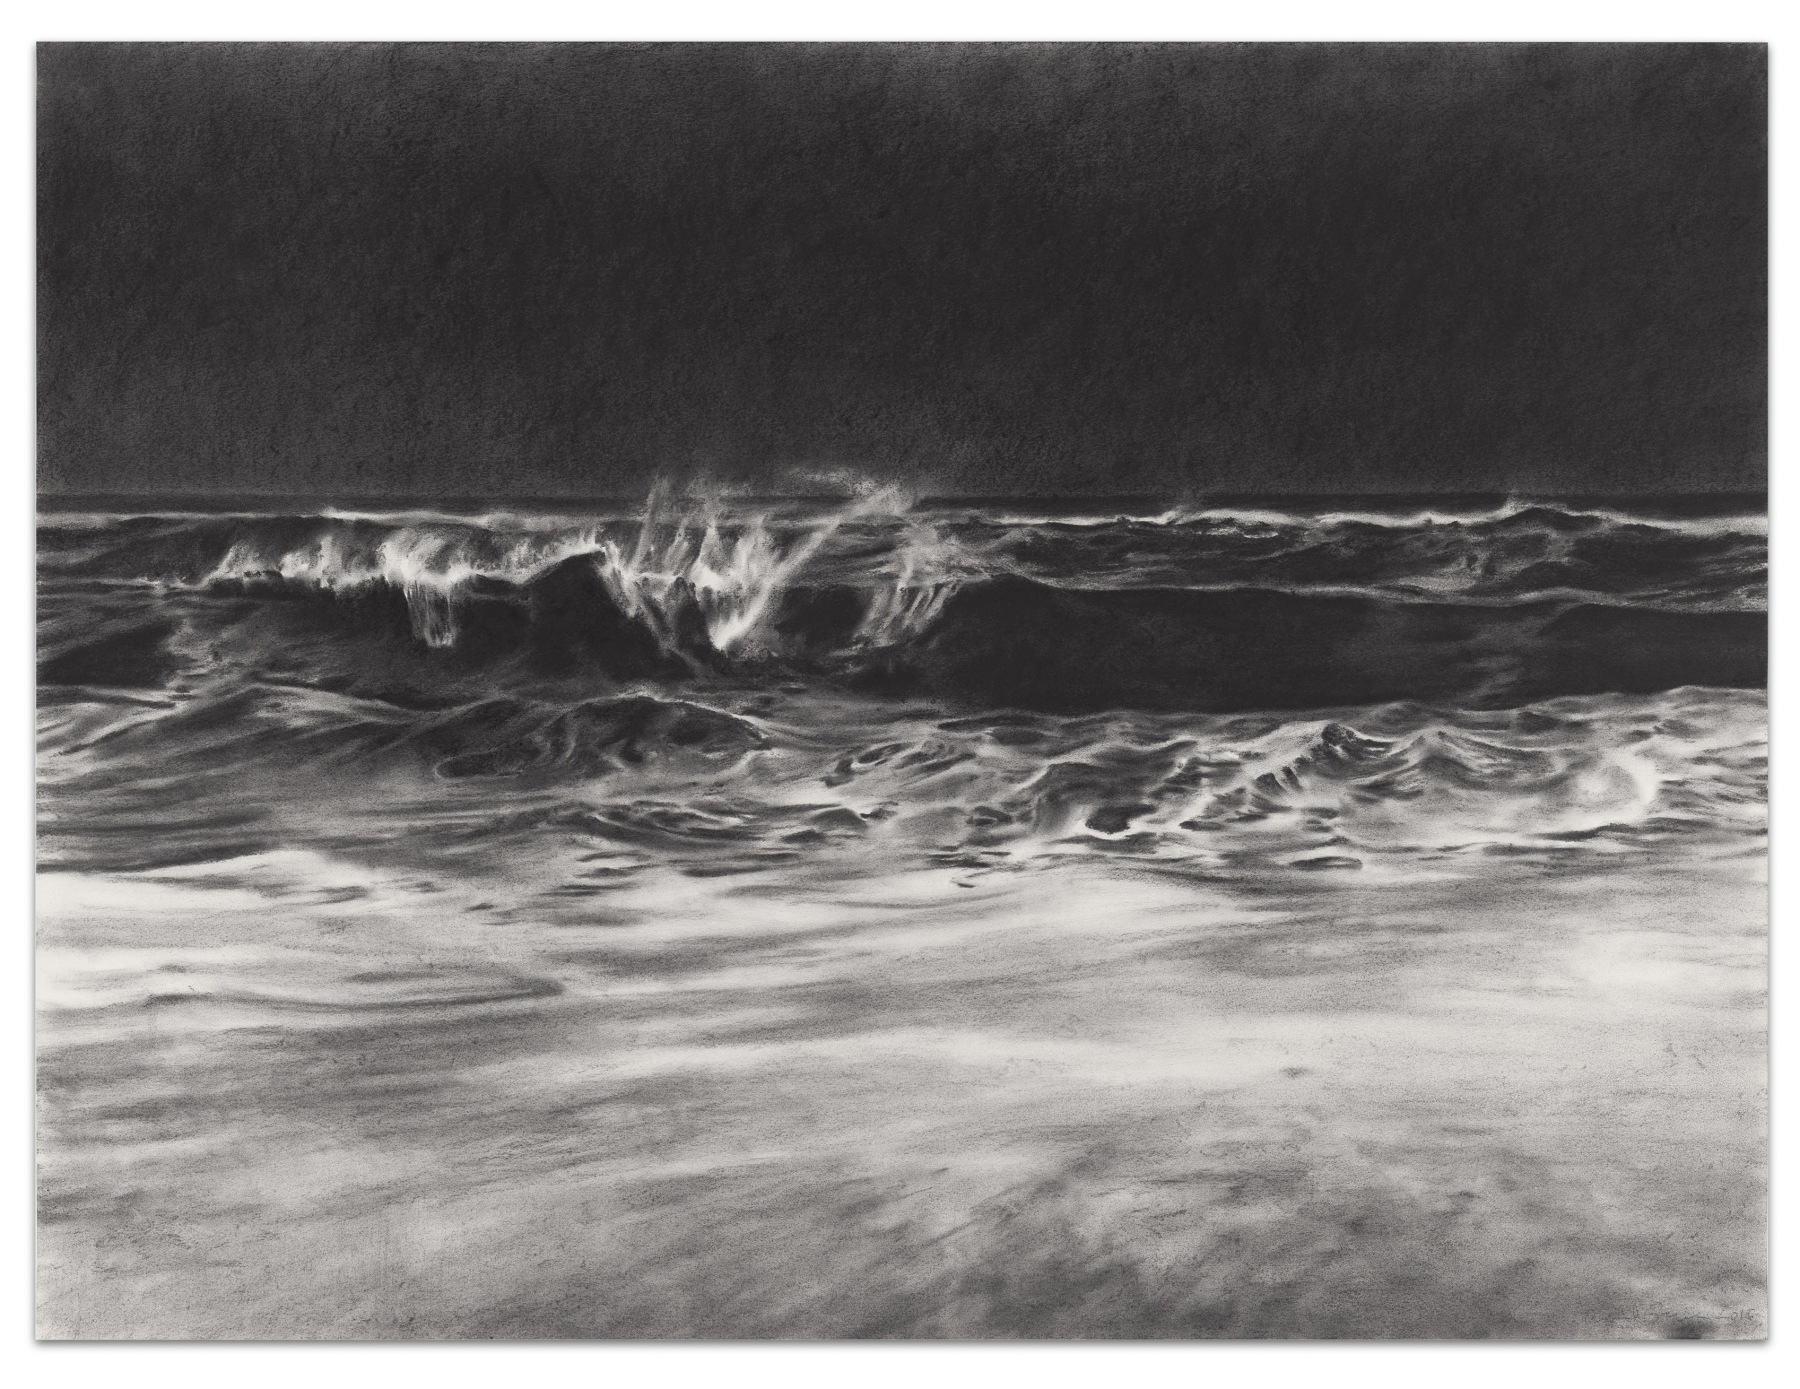 Weighing the Ocean, 2018, Charcoal on paper, 37 1/2 x 50 inches, 95.3 x 127 cm,&nbsp;MMG#30827